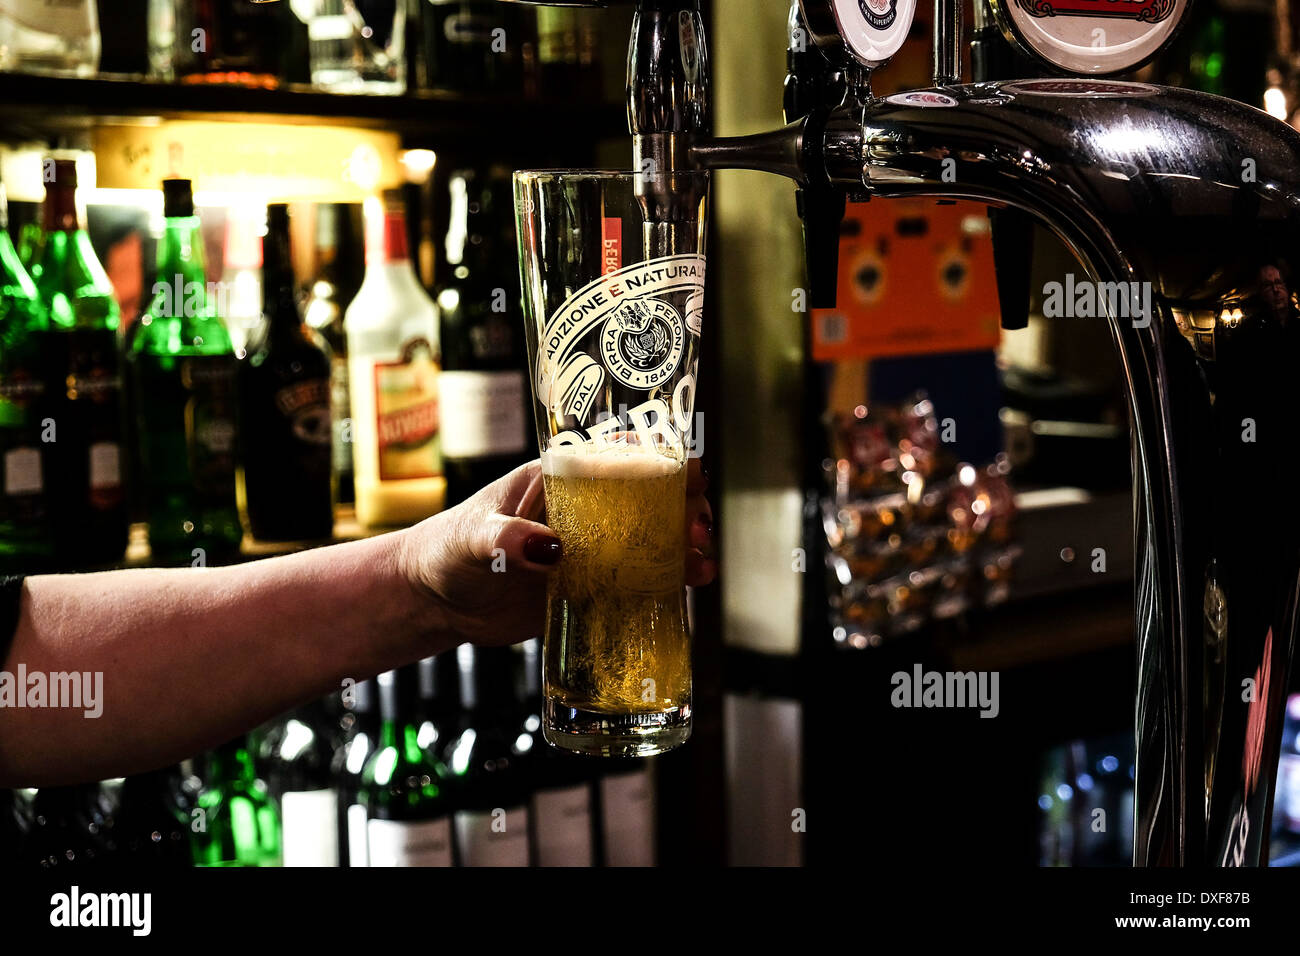 https://c8.alamy.com/comp/DXF87B/a-pint-of-peroni-being-poured-by-bar-worker-DXF87B.jpg